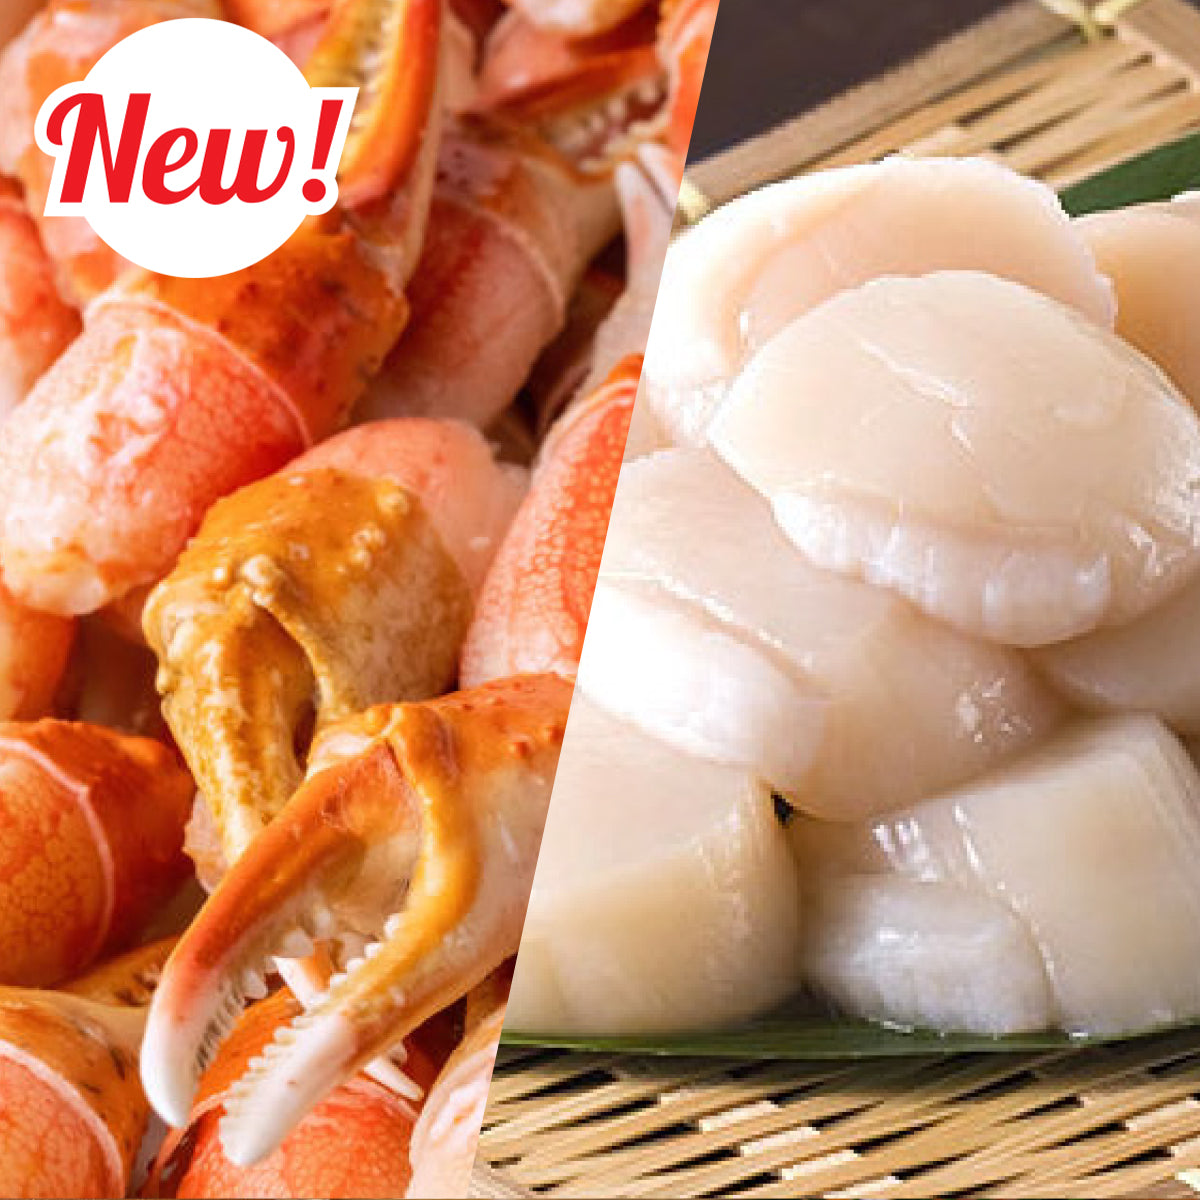 Snow Crab Claws and Hokkaido Scallops